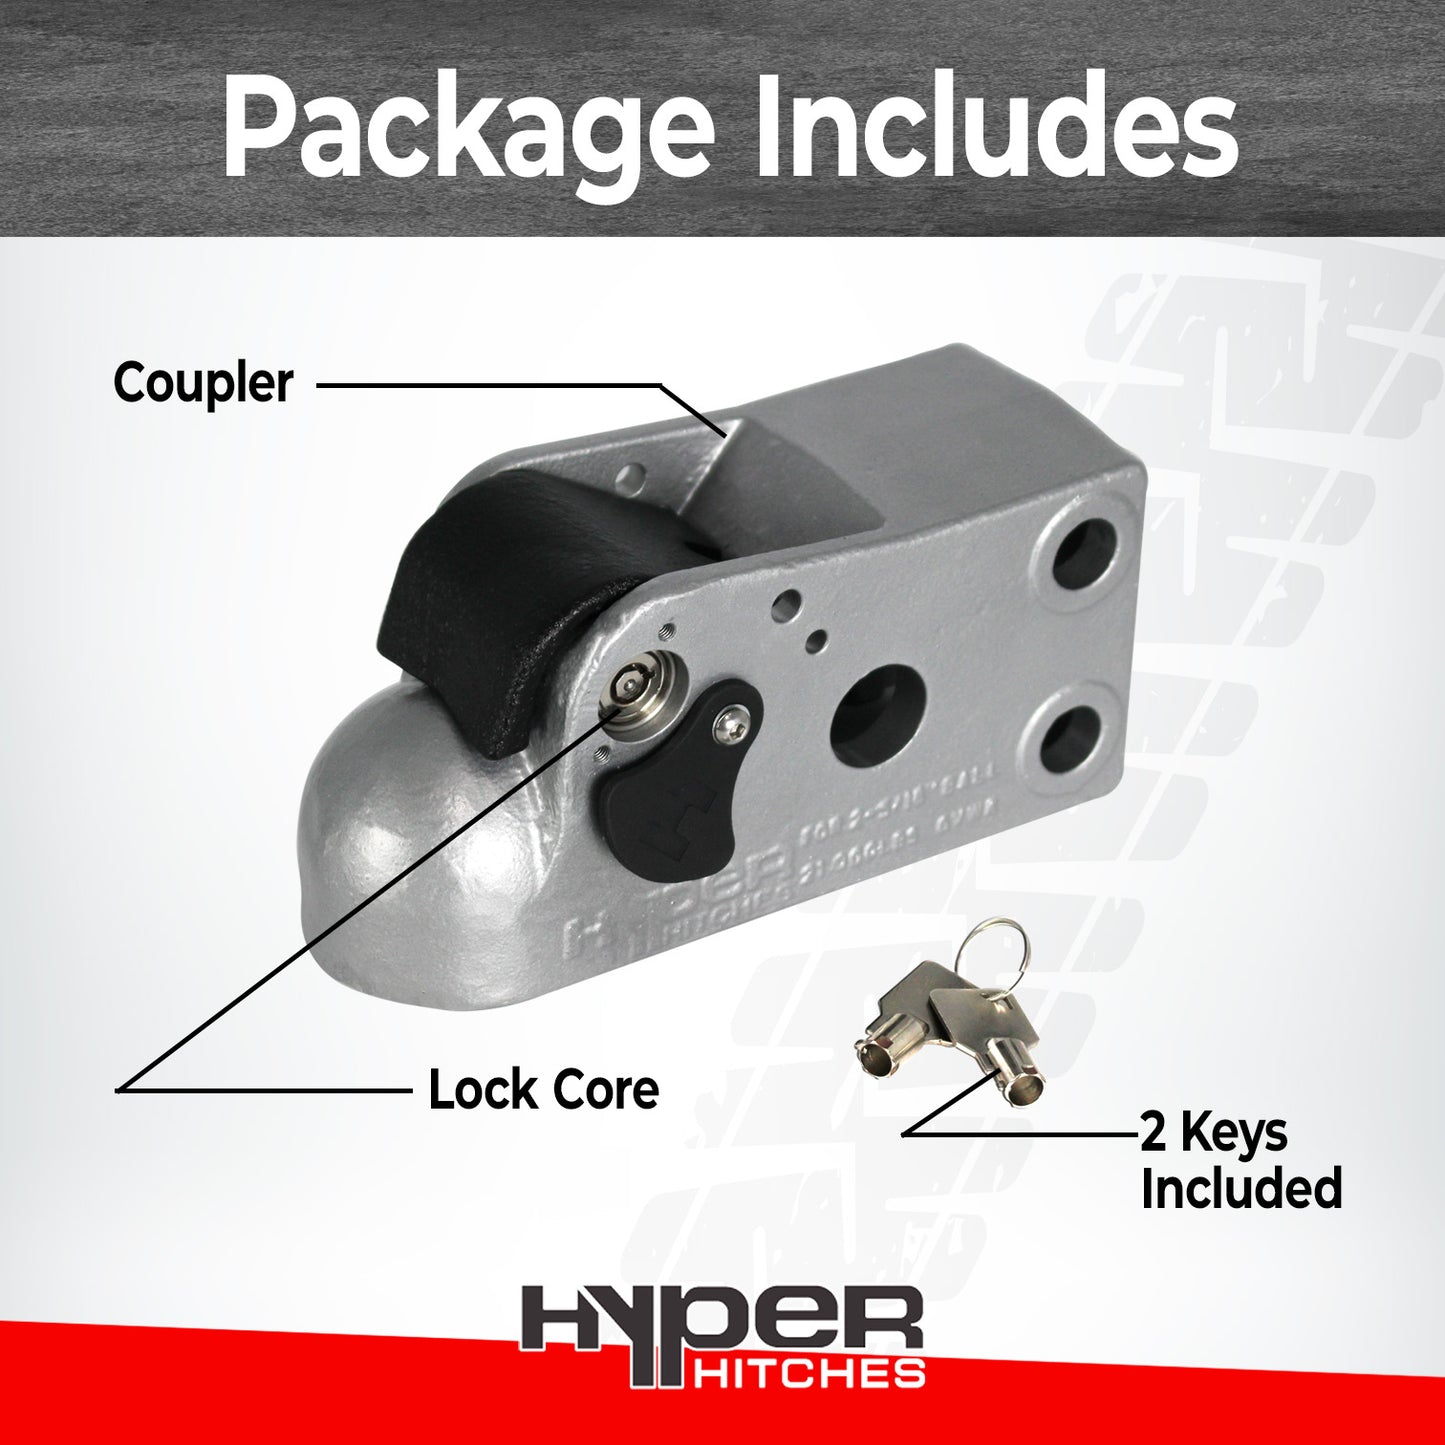 Coupler with Integrated Lock